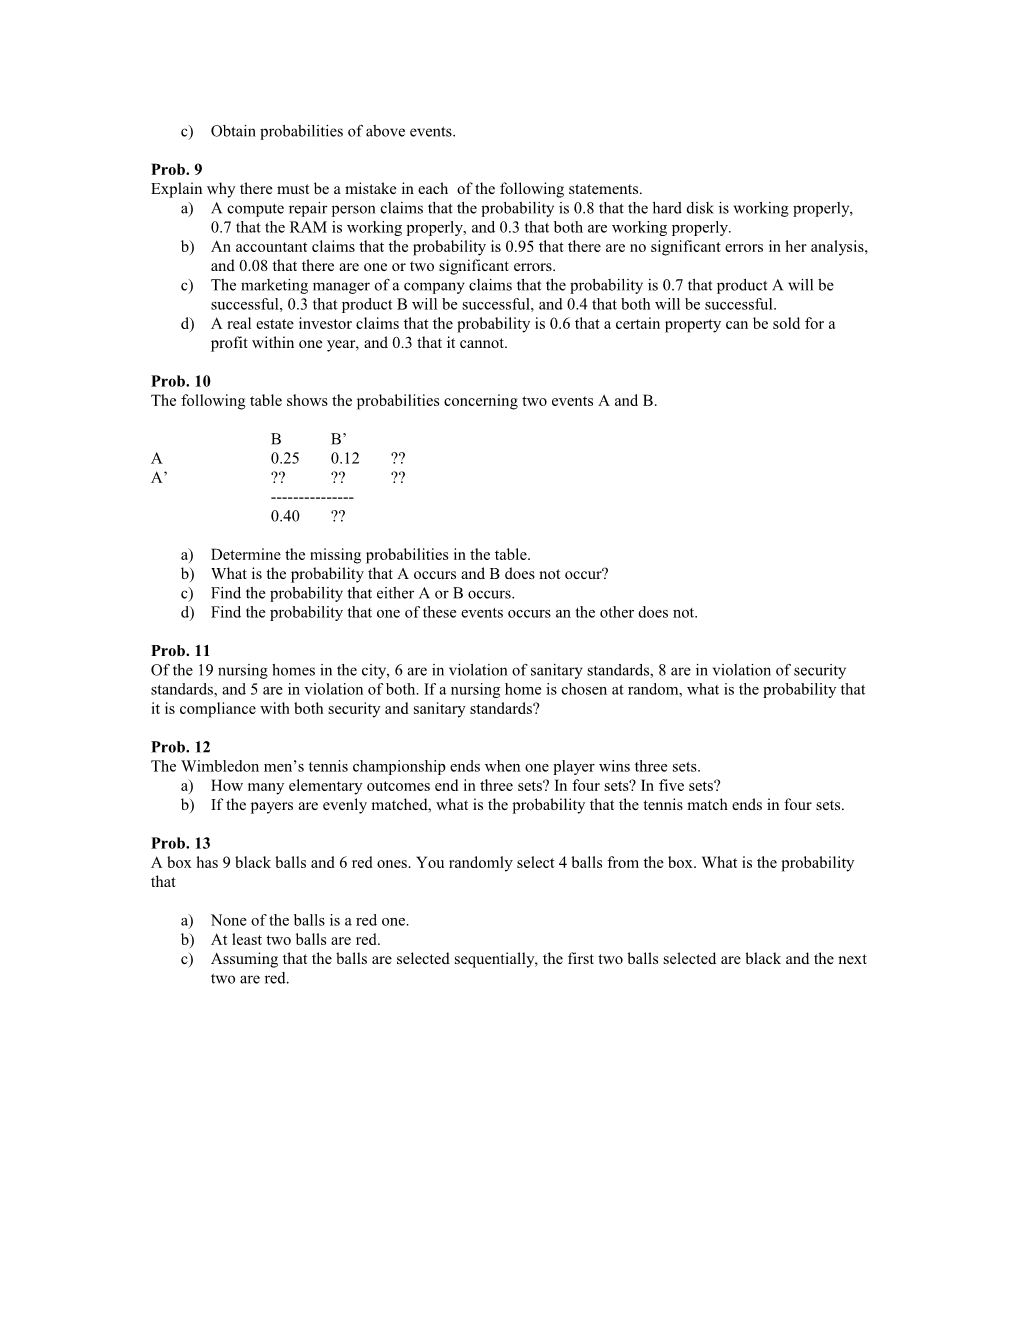 Probability Theory: a Few Practice Problems